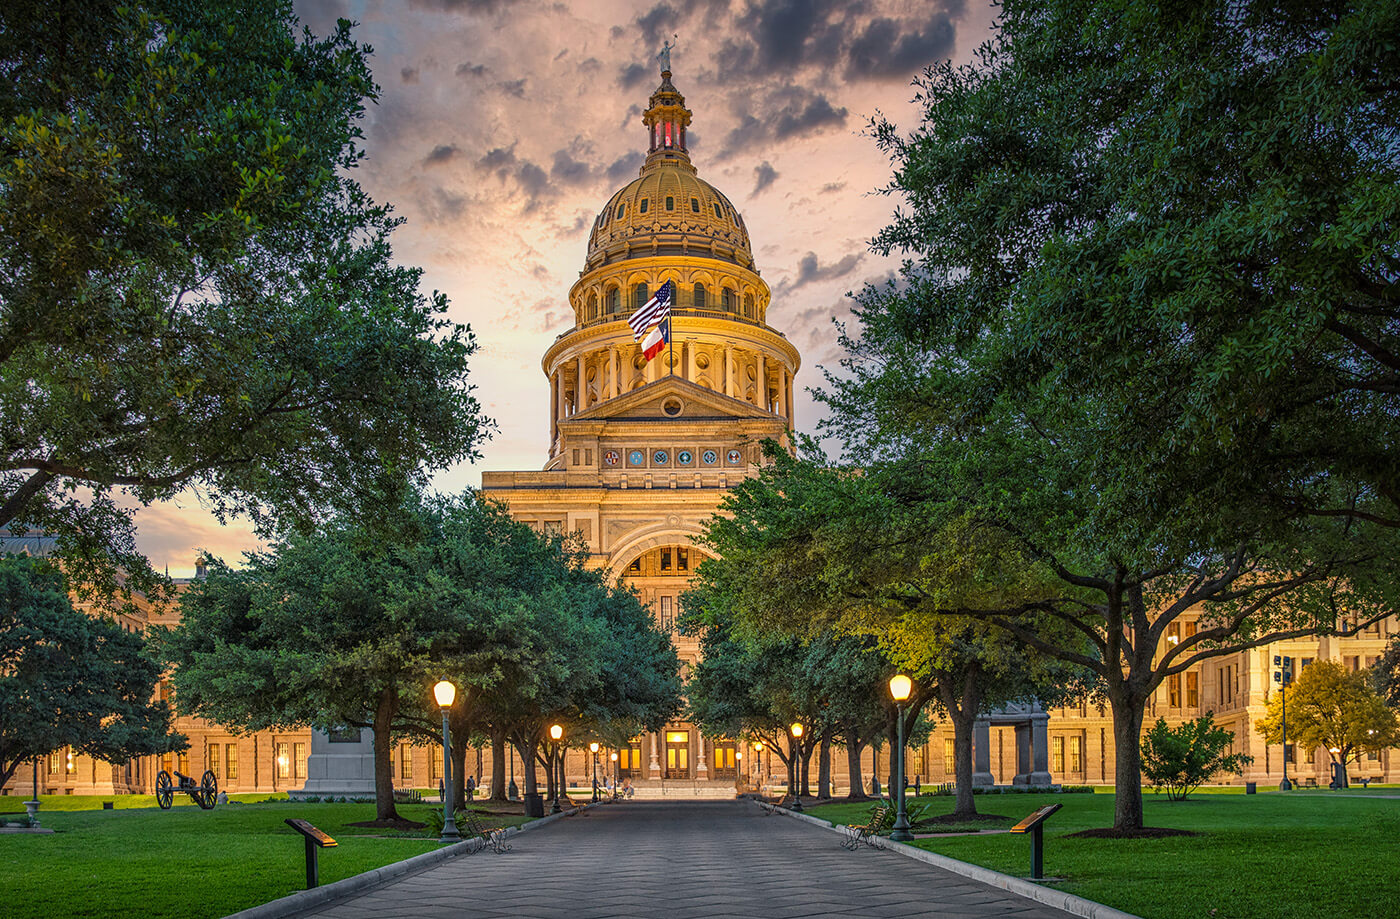 Texas' Capital Building located in Austin